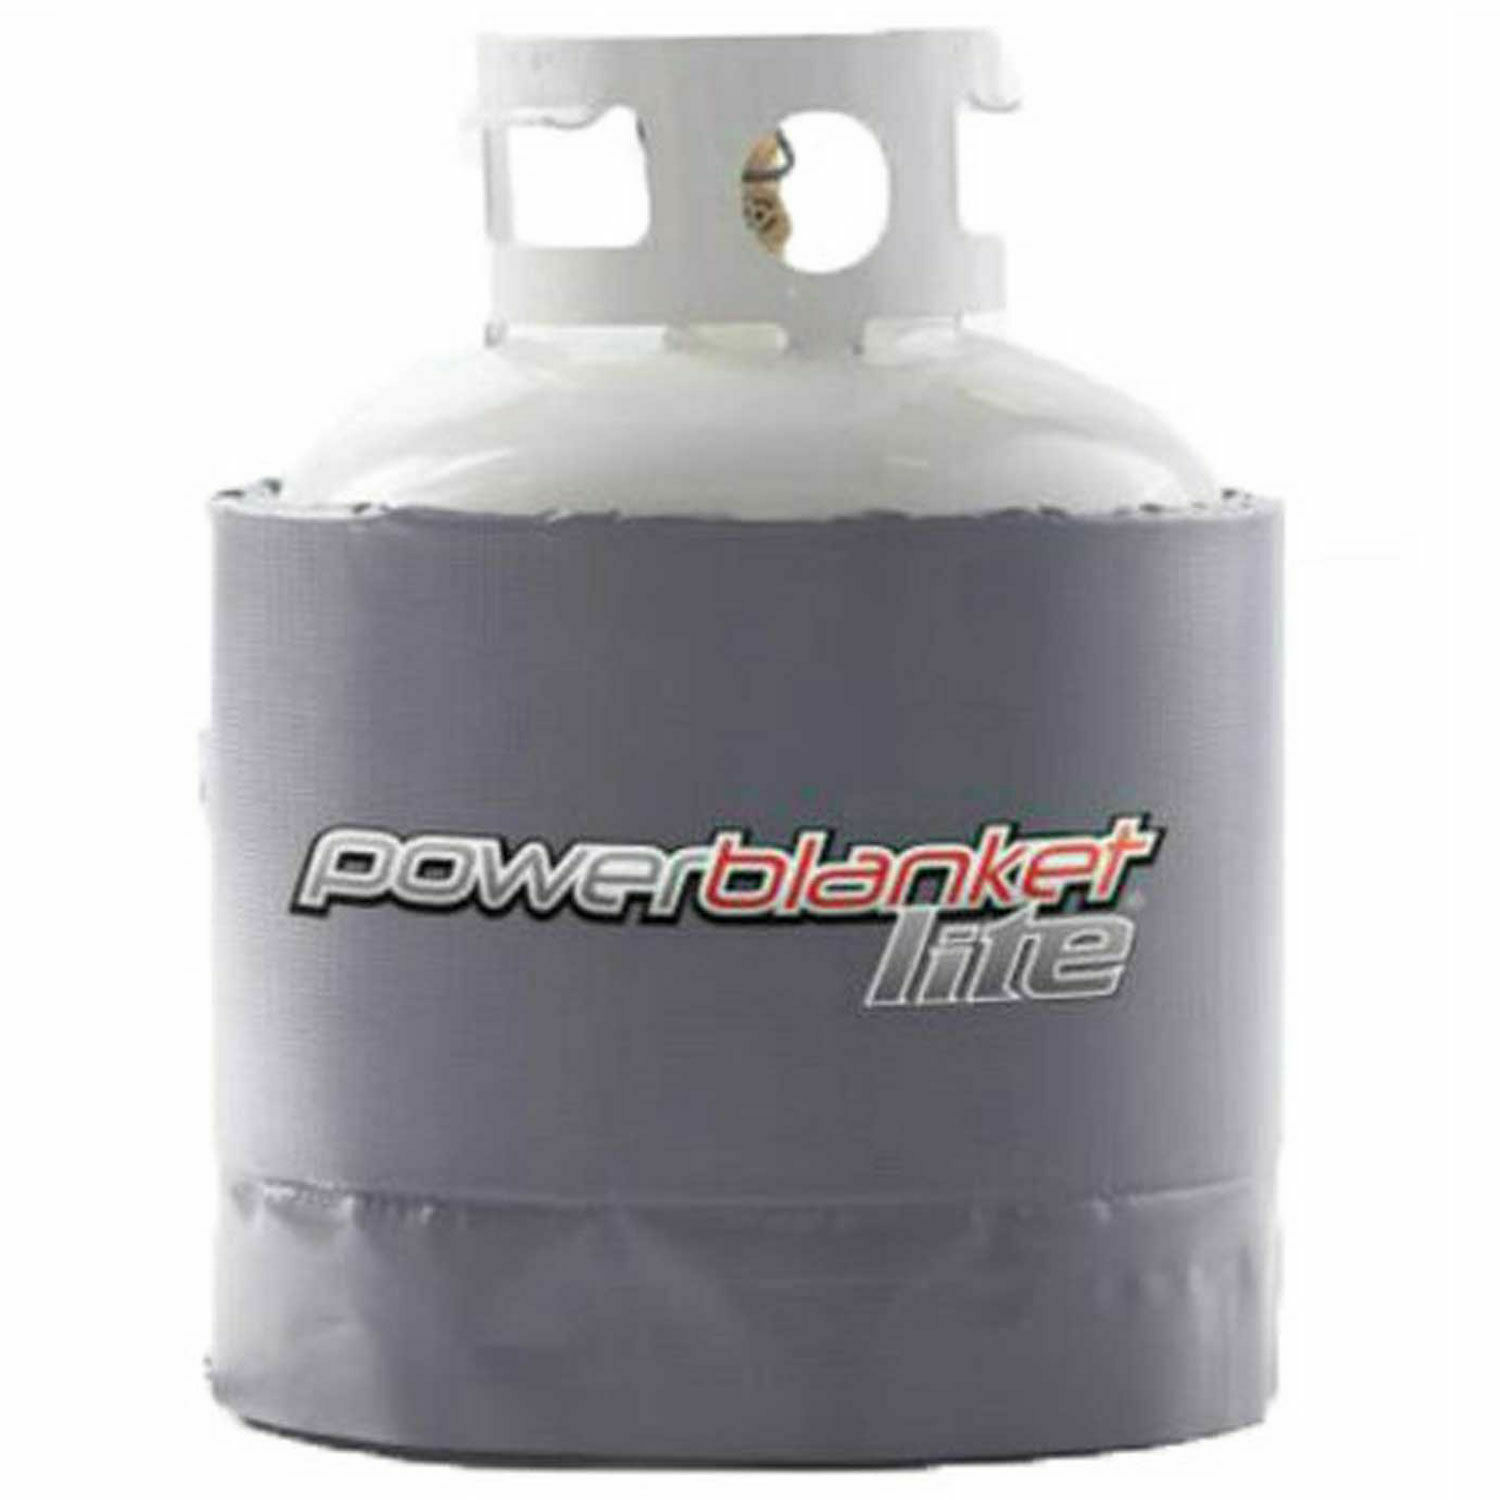 Powerblanket Pbl20 Lite Insulated Gas Cylinder Heater, 20 Lb. Capacity,